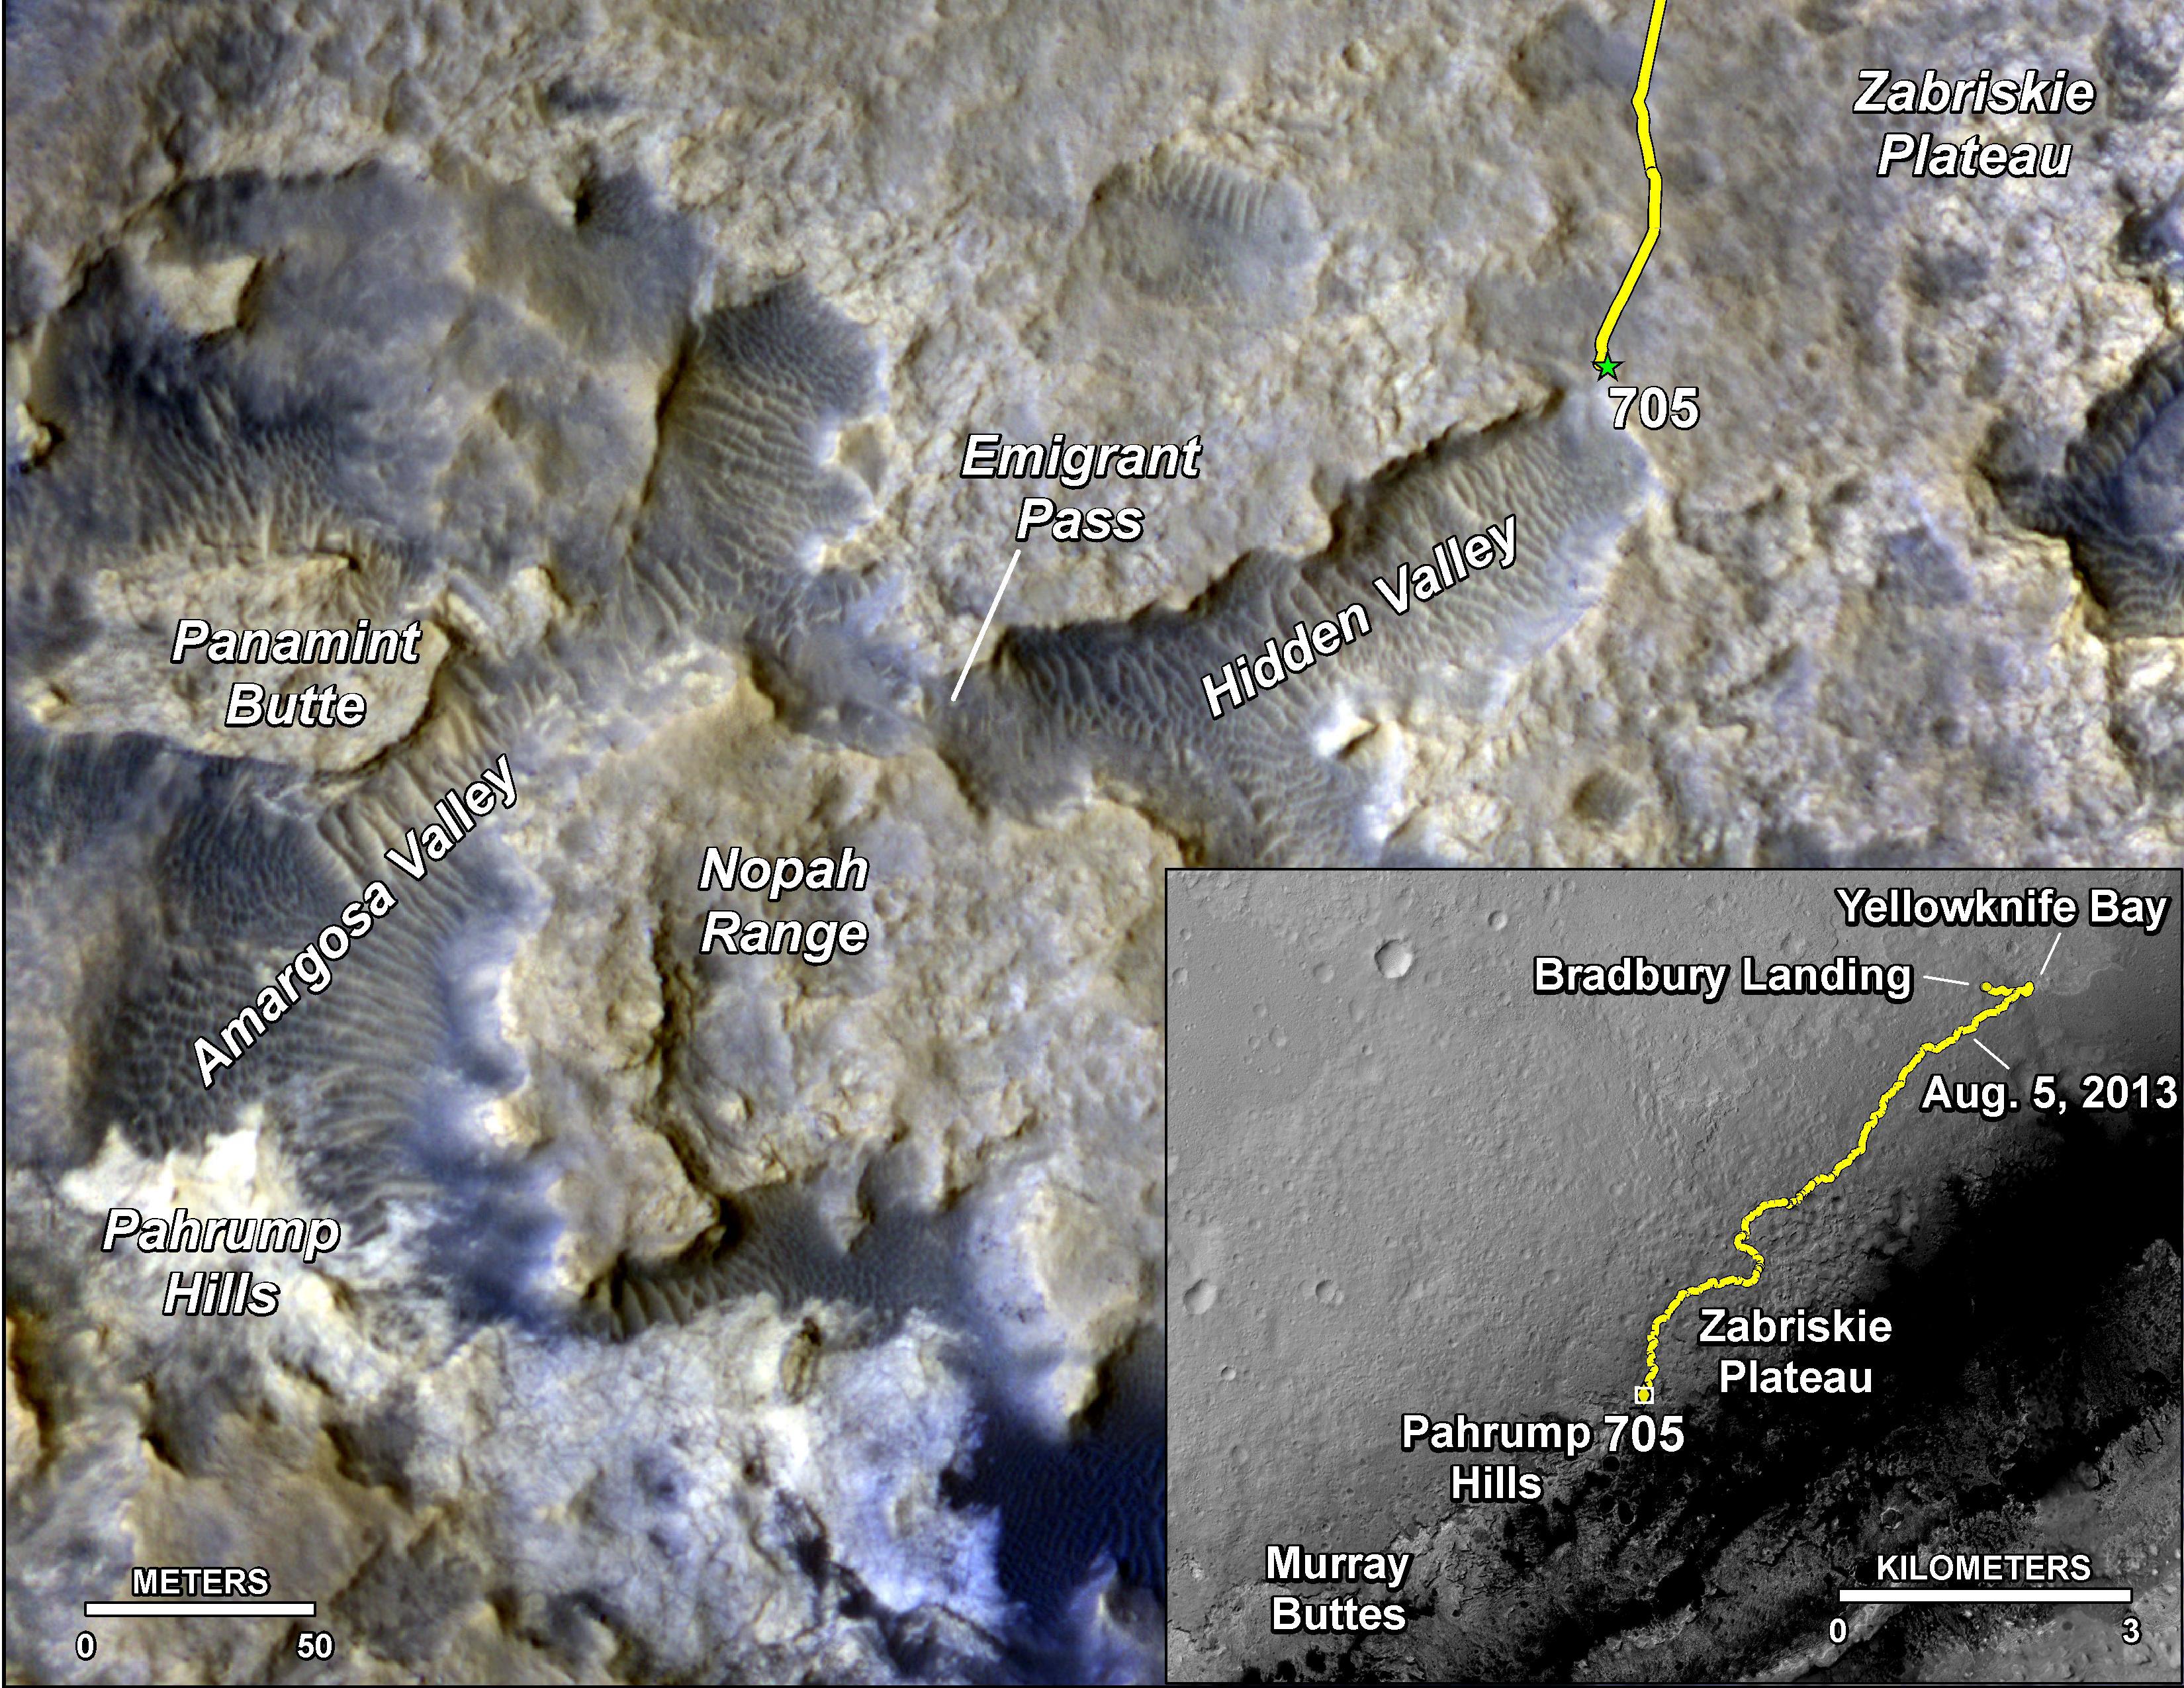 The main map here shows the assortment of landforms near the location of NASA’s Curiosity Mars rover around the rover’s second anniversary of landing on Mars. The gold traverse line entering from upper right ends at Curiosity’s position as of Sol 705 on Mars (July 31, 2014). The inset map shows the mission’s entire traverse from the landing on Aug. 5, 2012, PDT (Aug. 6, EDT) to Sol 705, and the remaining distance to long-term science destinations near Murray Buttes, at the base of Mount Sharp. The label “Aug. 5, 2013″ indicates where Curiosity was one year after landing. Credit: NASA/JPL-Caltech/Univ. of Arizona